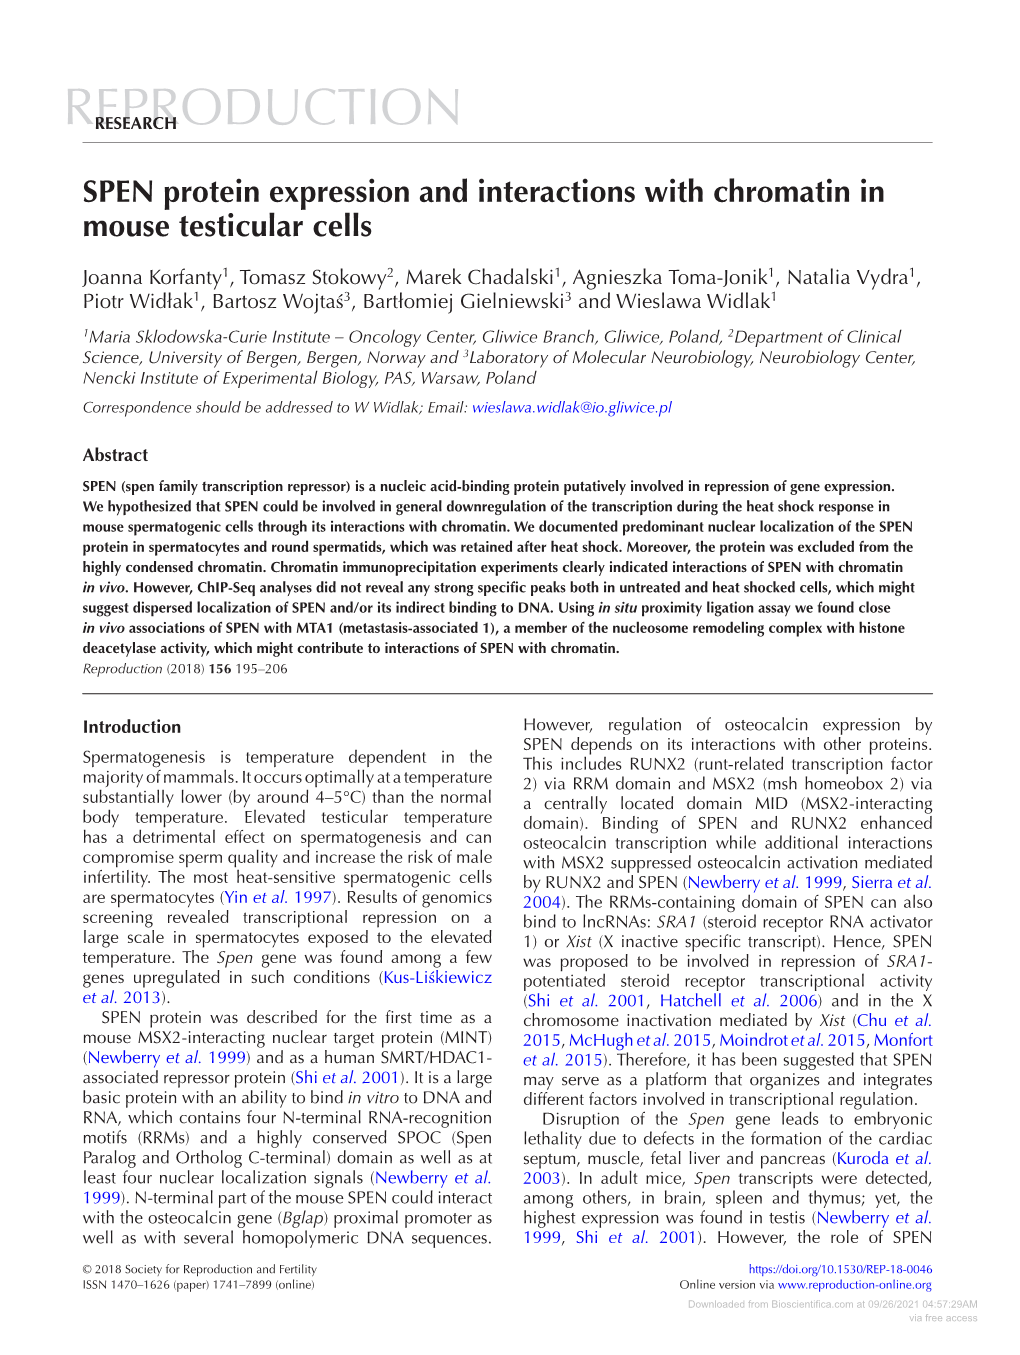 SPEN Protein Expression and Interactions with Chromatin in Mouse Testicular Cells